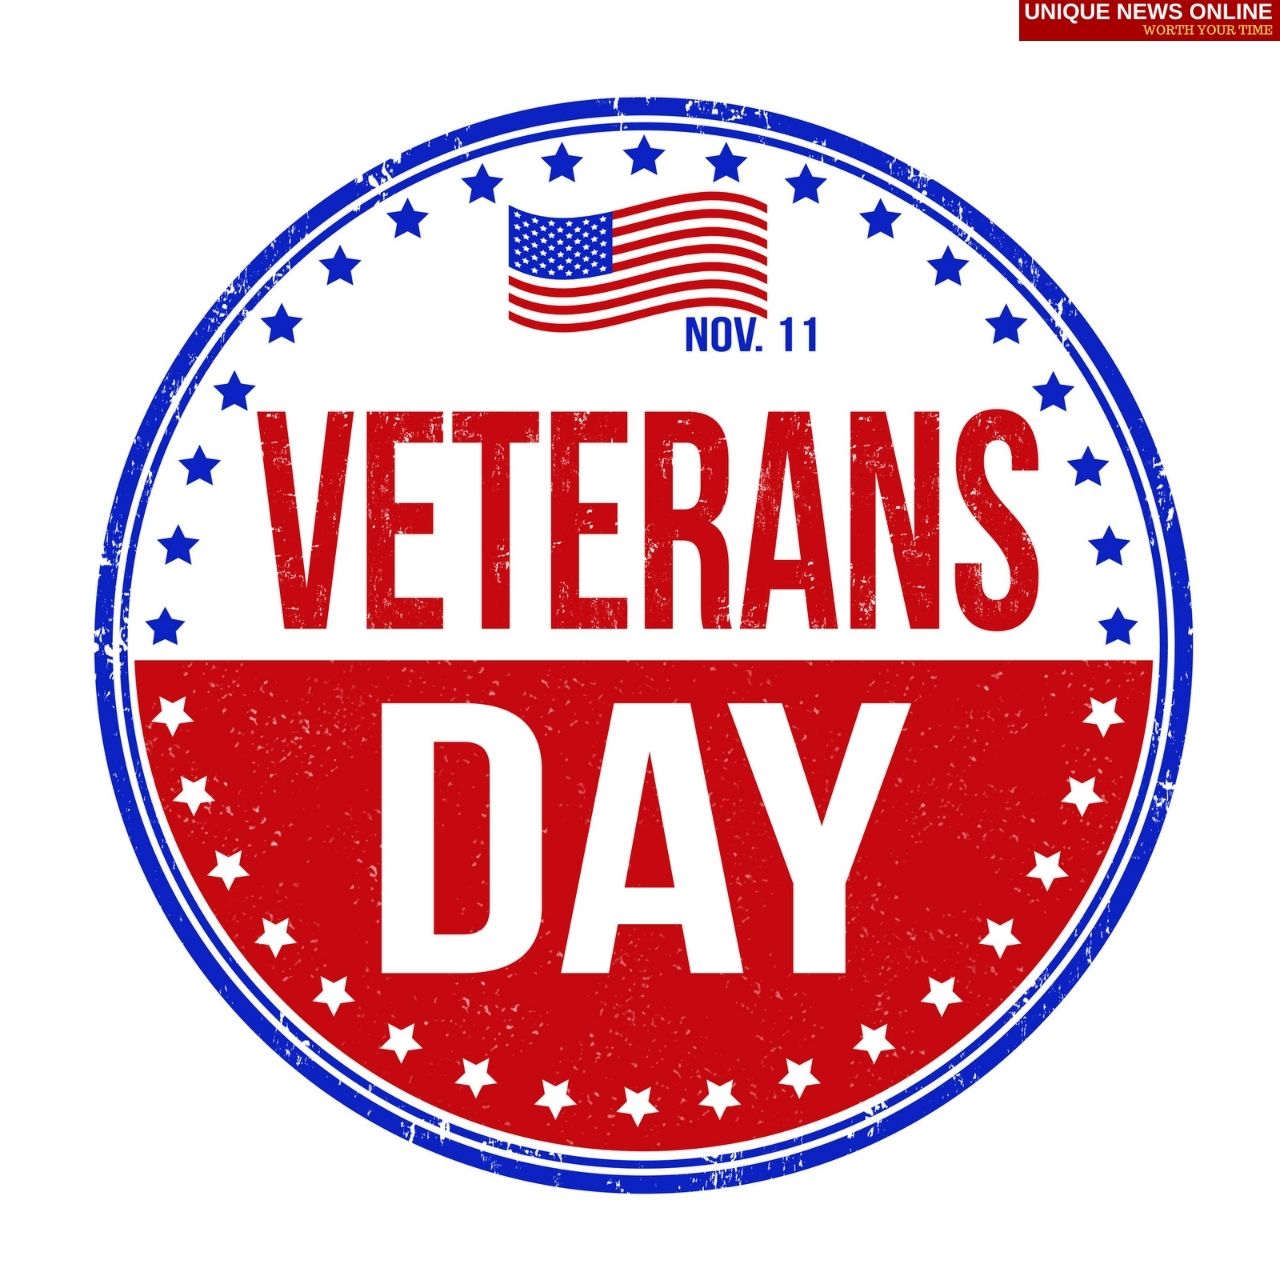 Veterans Day 2021 Wishes, Quotes, Sayings, Slogans, and Messages to honor US Veterans